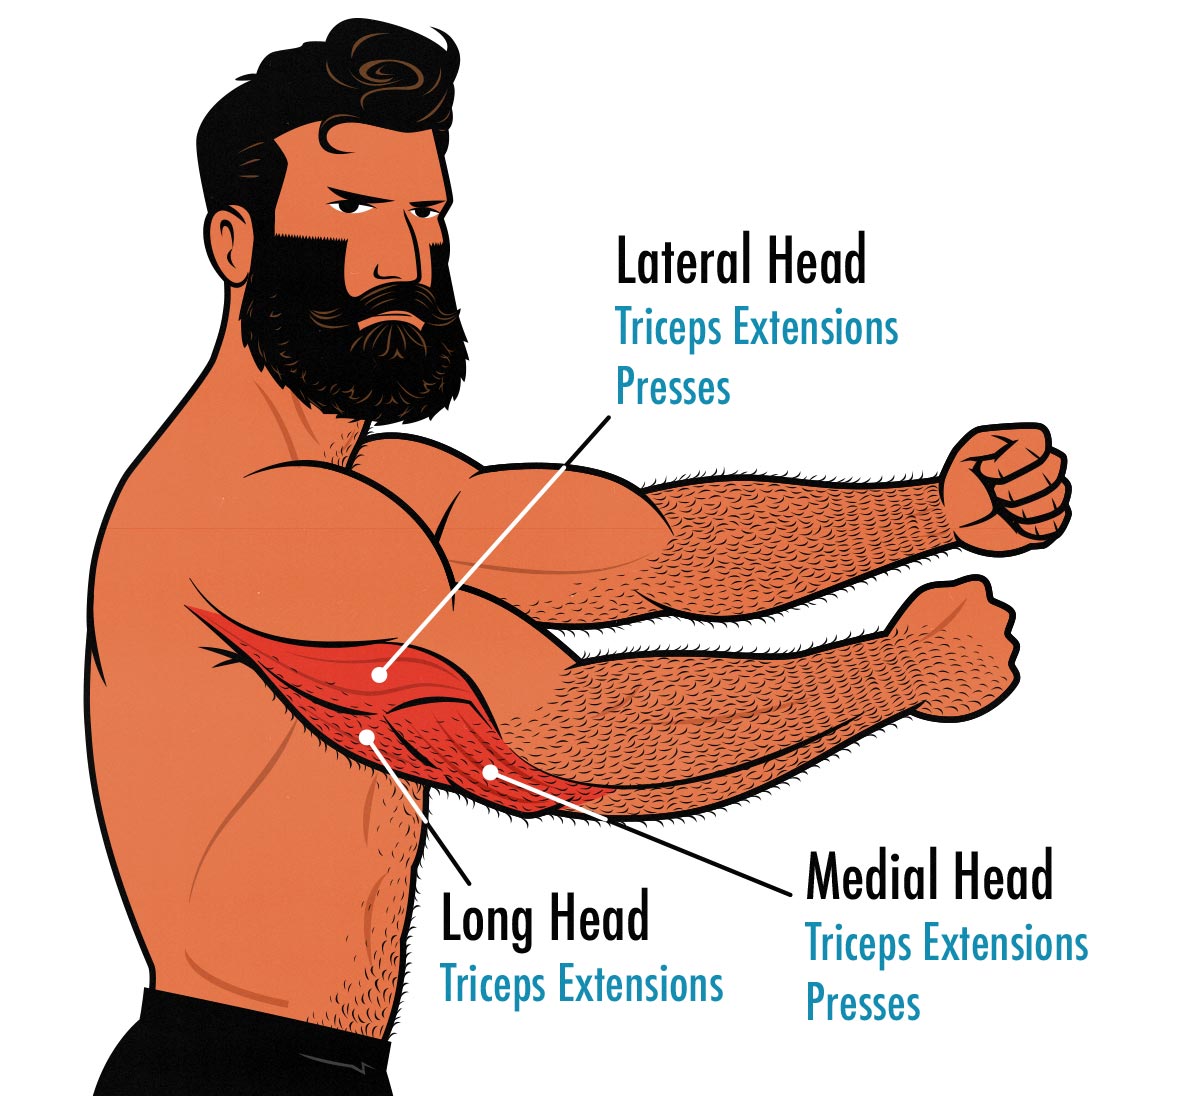 Diagram showing the long head, medial head, and lateral heads of the triceps along with the best exercises for stimulating them.